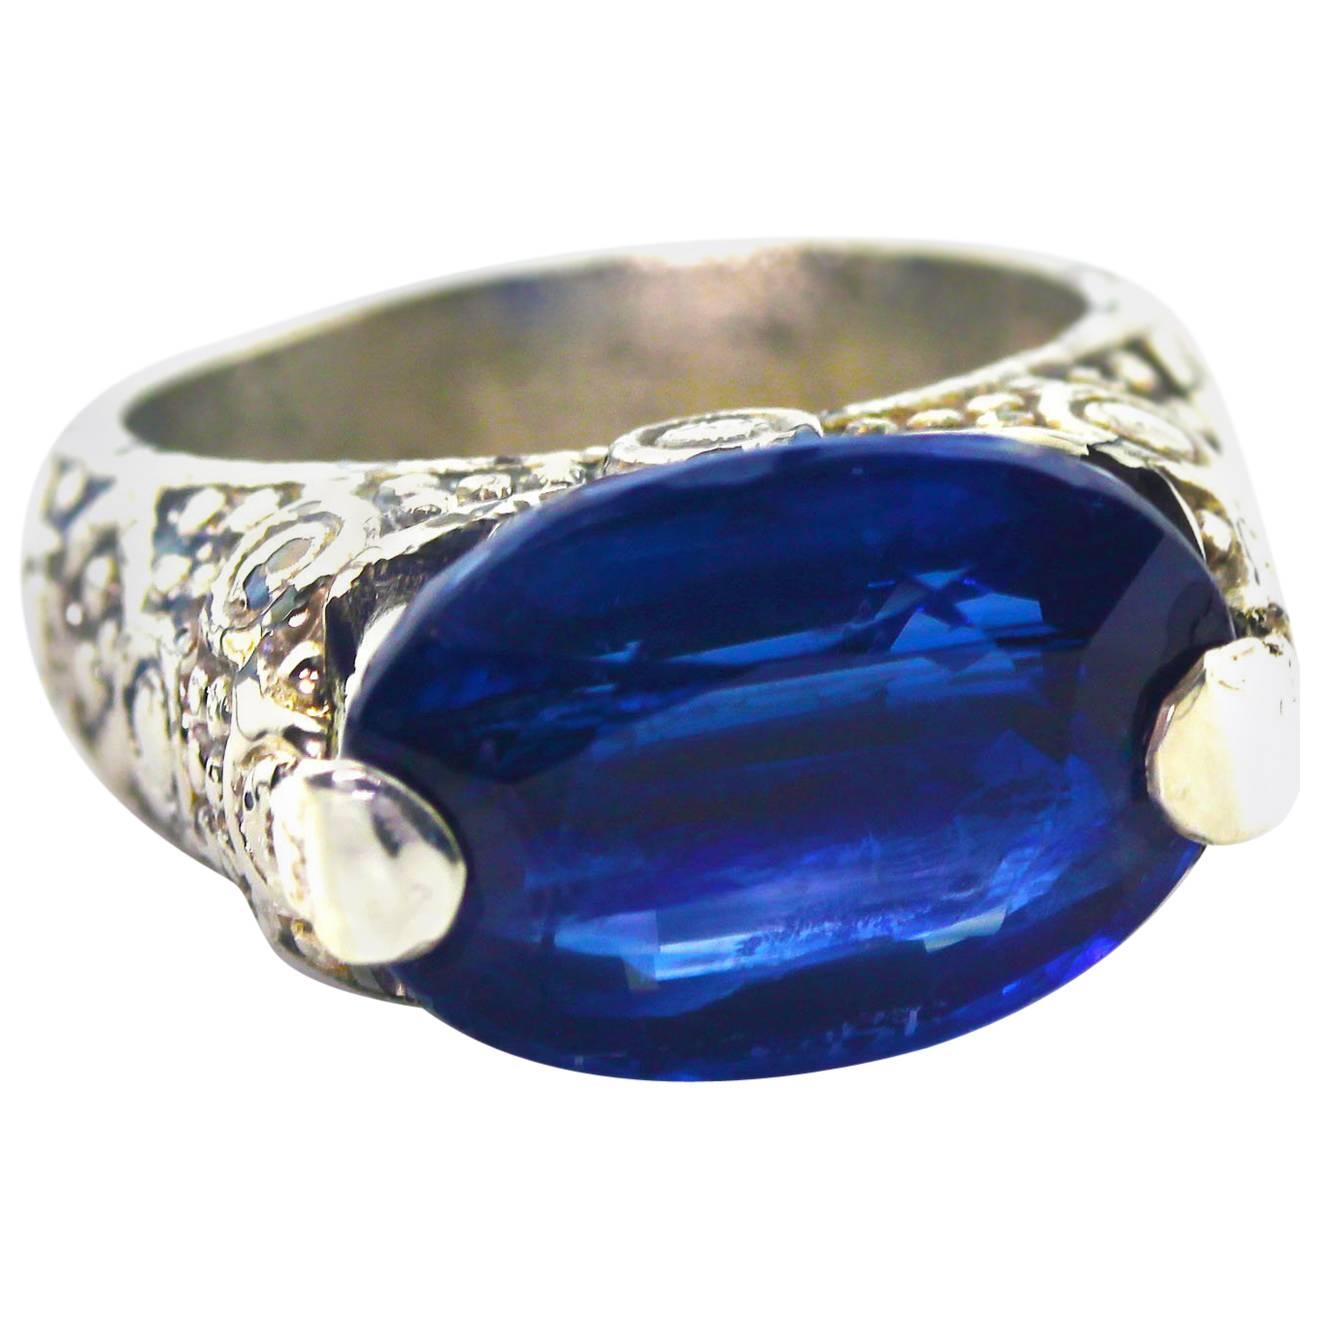 12.76 Oval Kyanite Sterling Silver Cocktail Ring